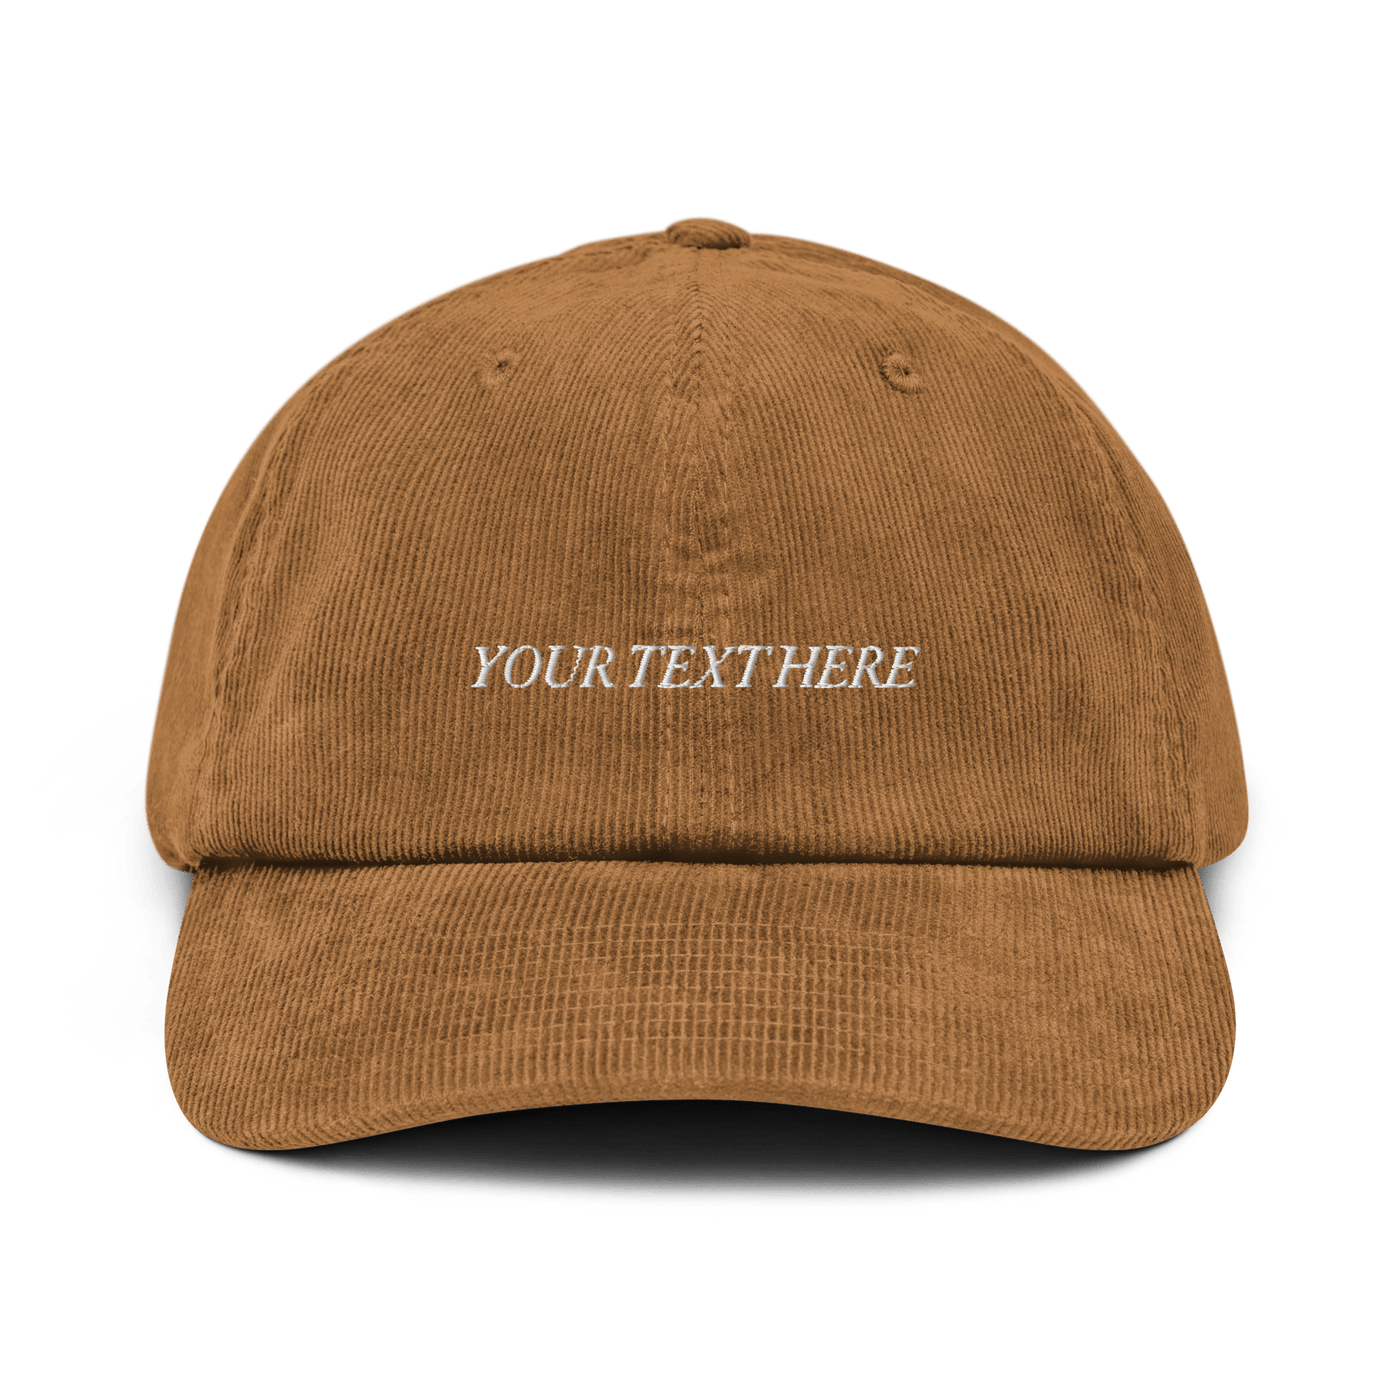 Customize Your Own Corduroy hat - Italic Font - Camel - - Just Another Cap Store